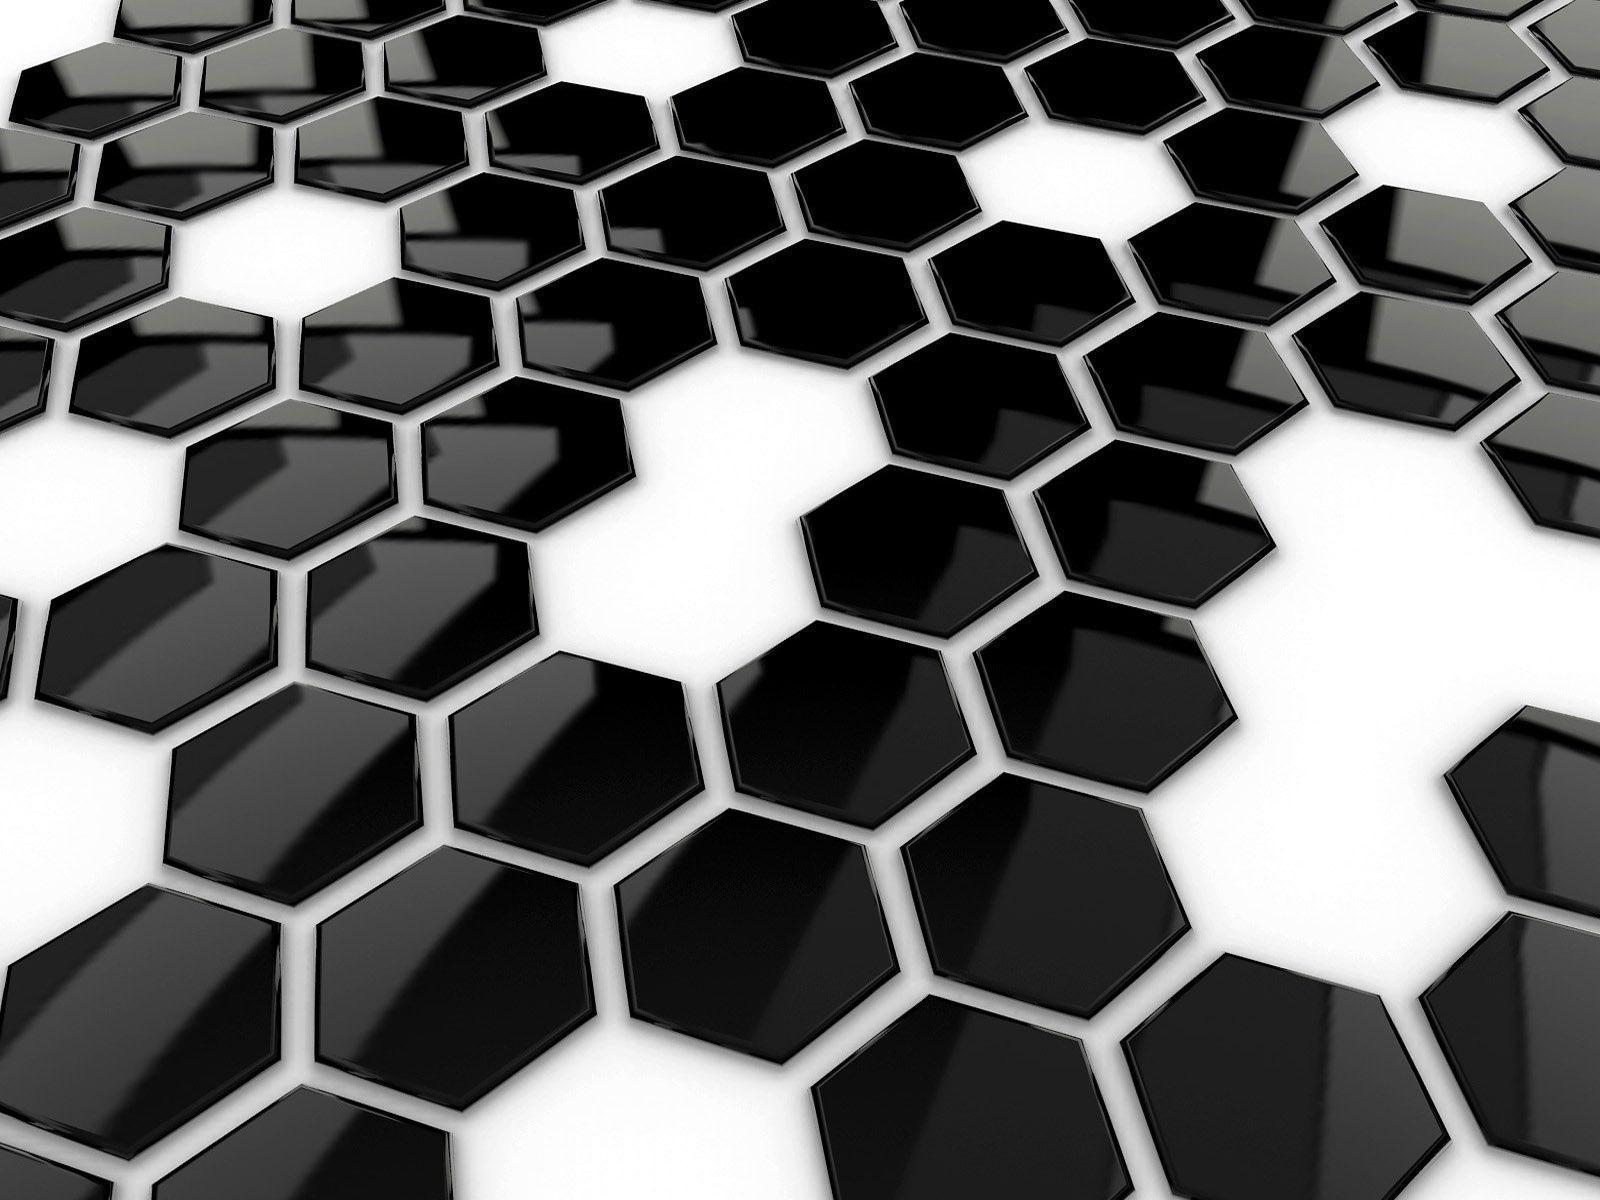 Honeycomb Wallpaper, Adorable HDQ Background of Honeycomb, 27